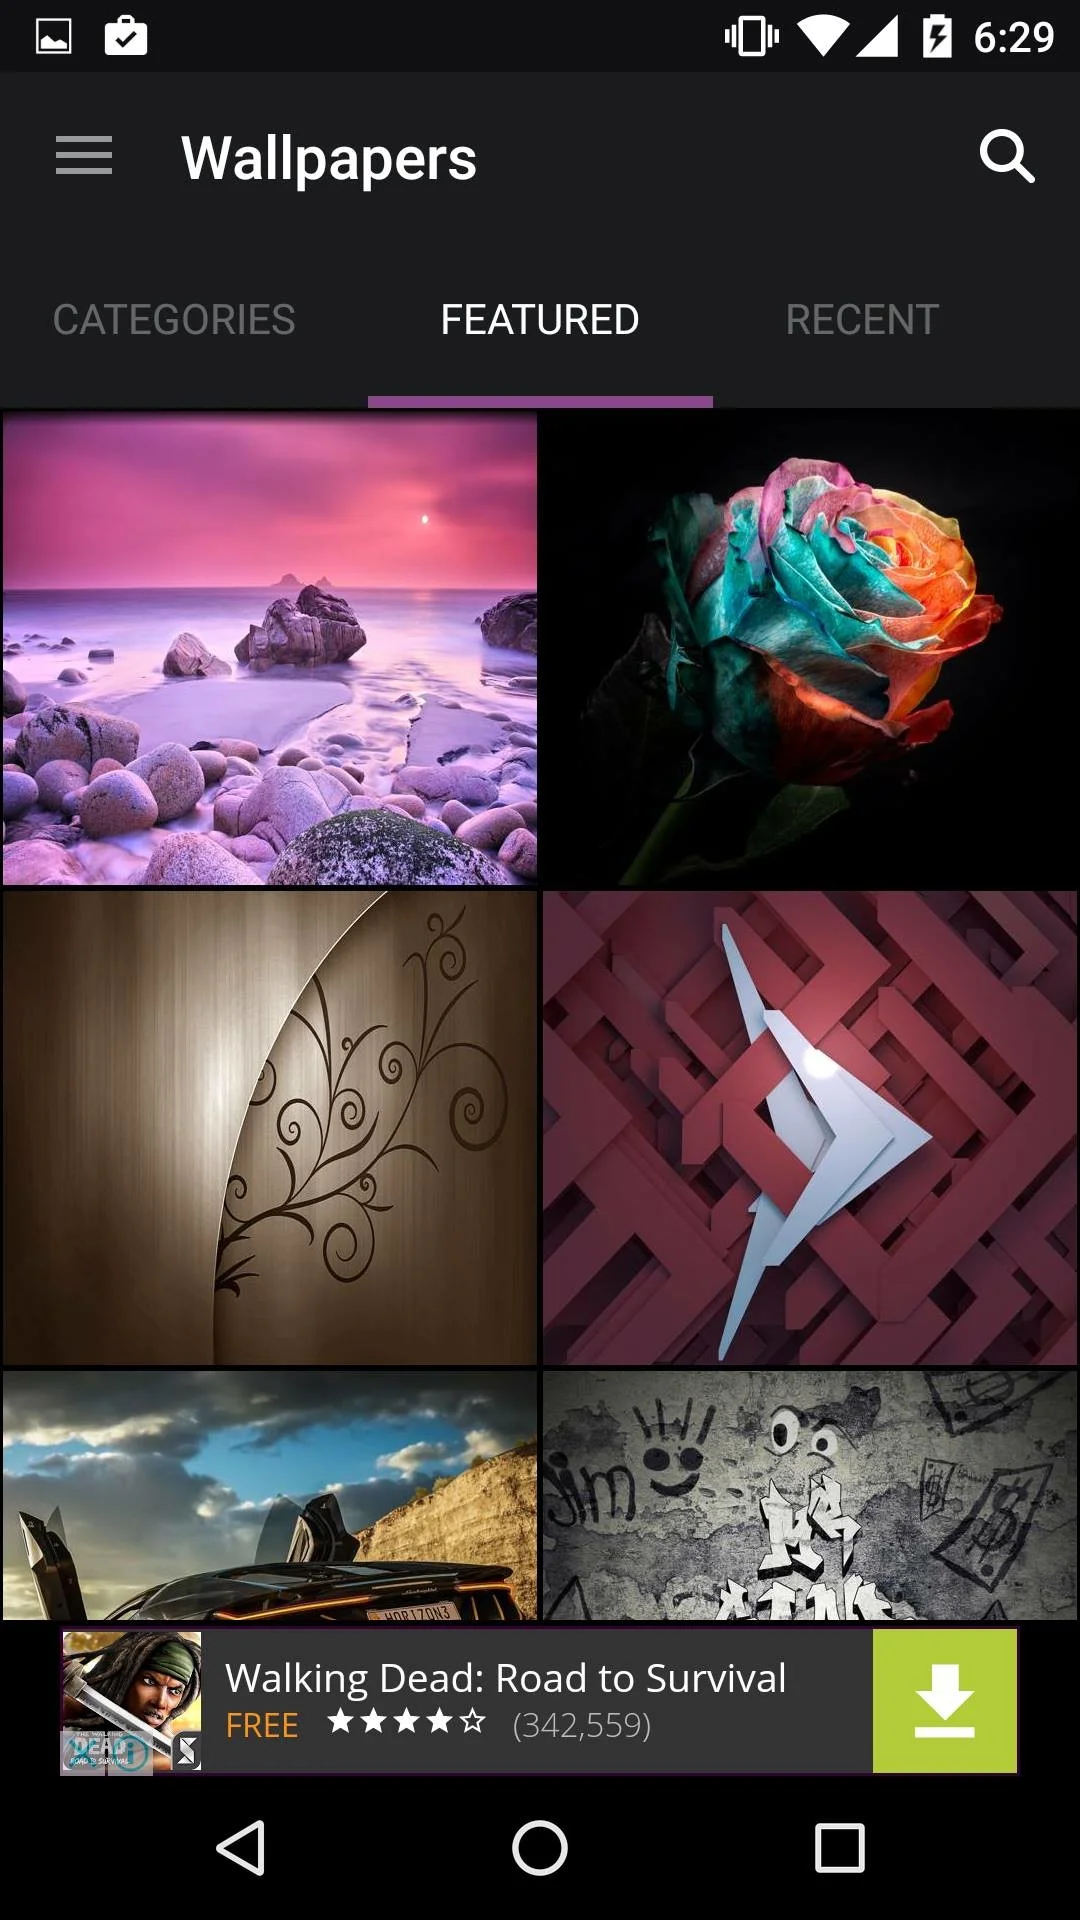 Top 5 Wallpaper Apps for Android Phones and Tablets